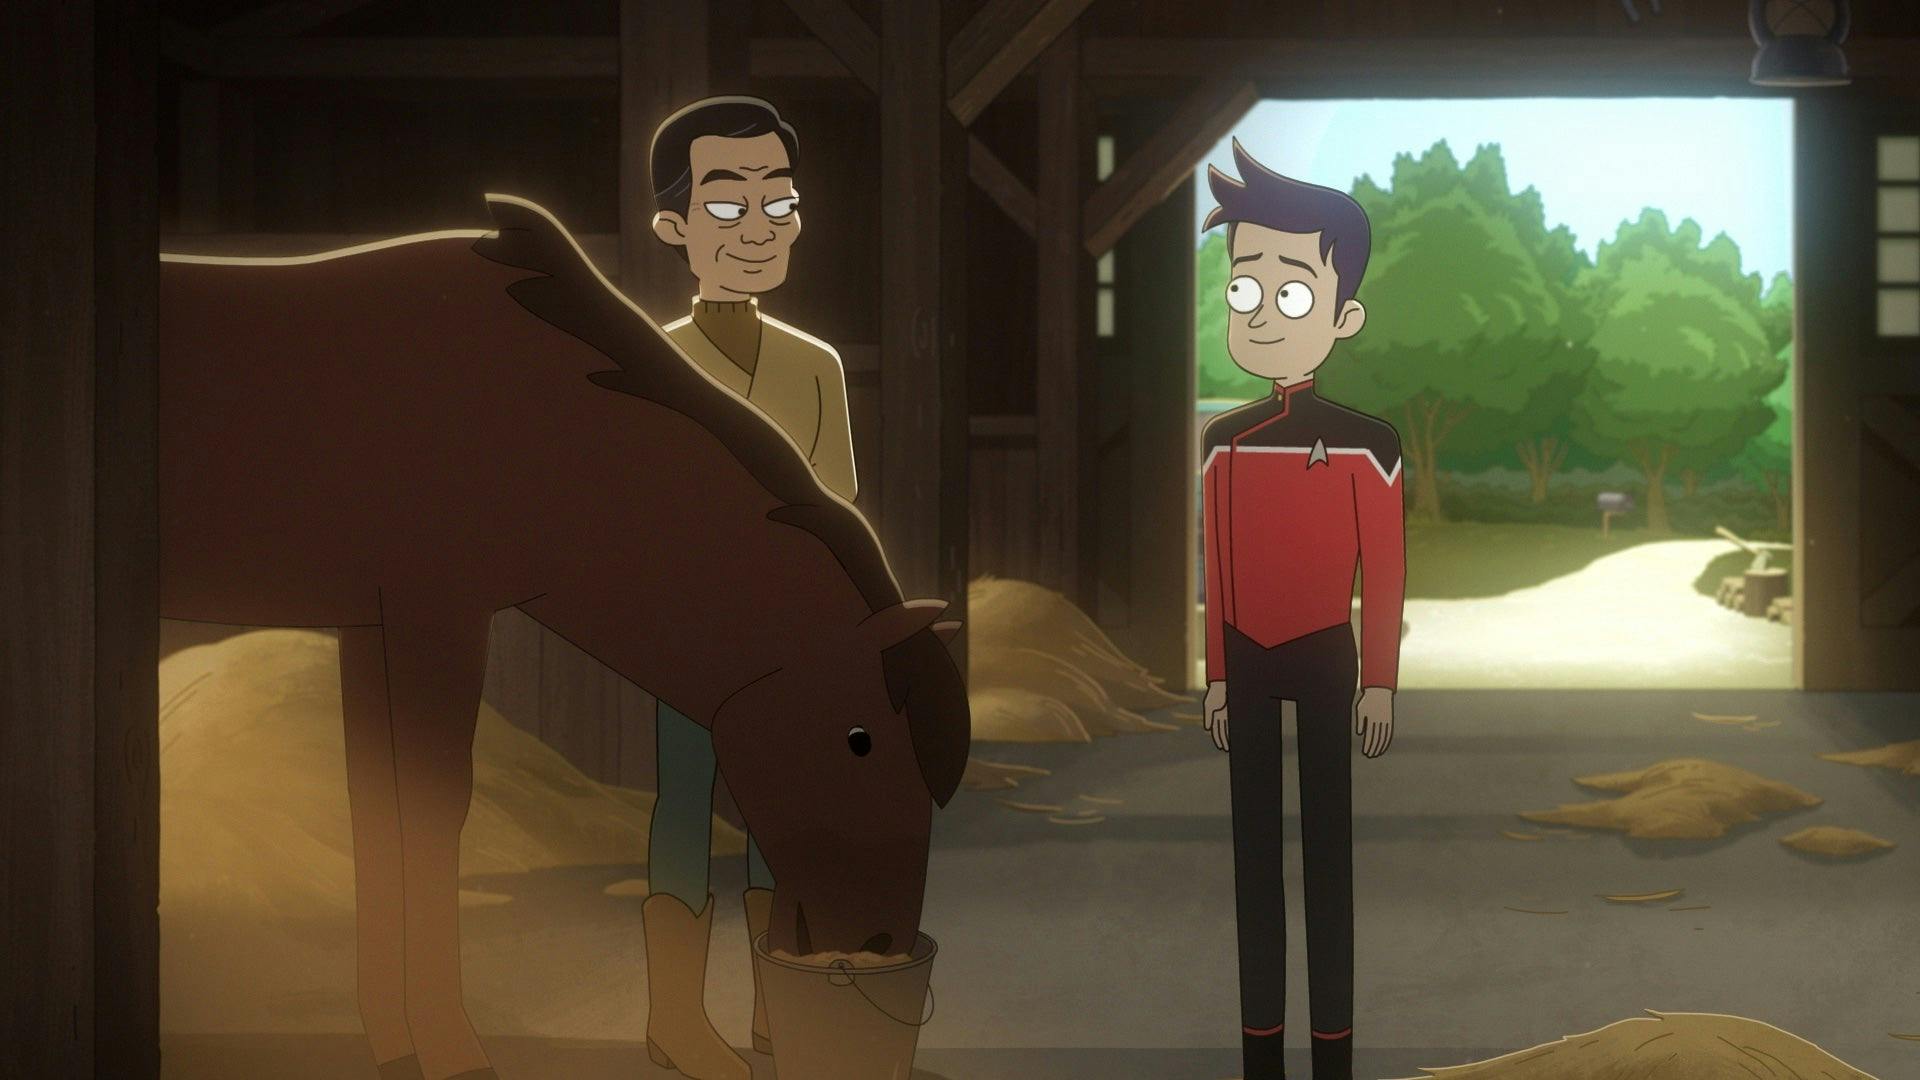 Boimler talks to Sulu as they stand next to a horse.